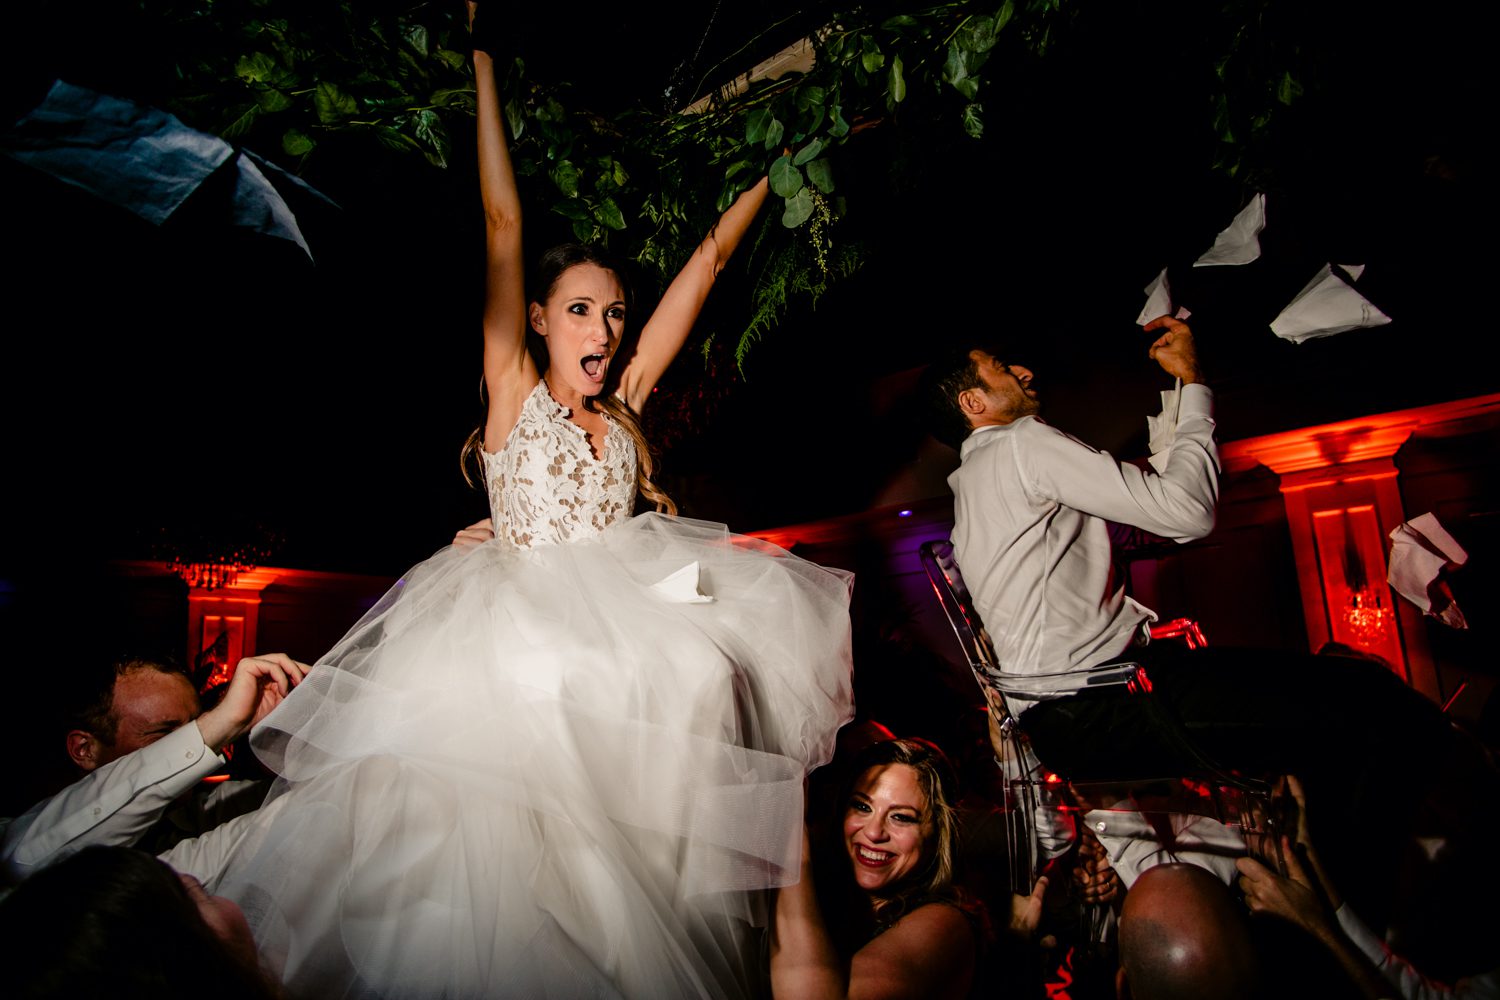 A bride and groom in a wedding dress being thrown into the air.